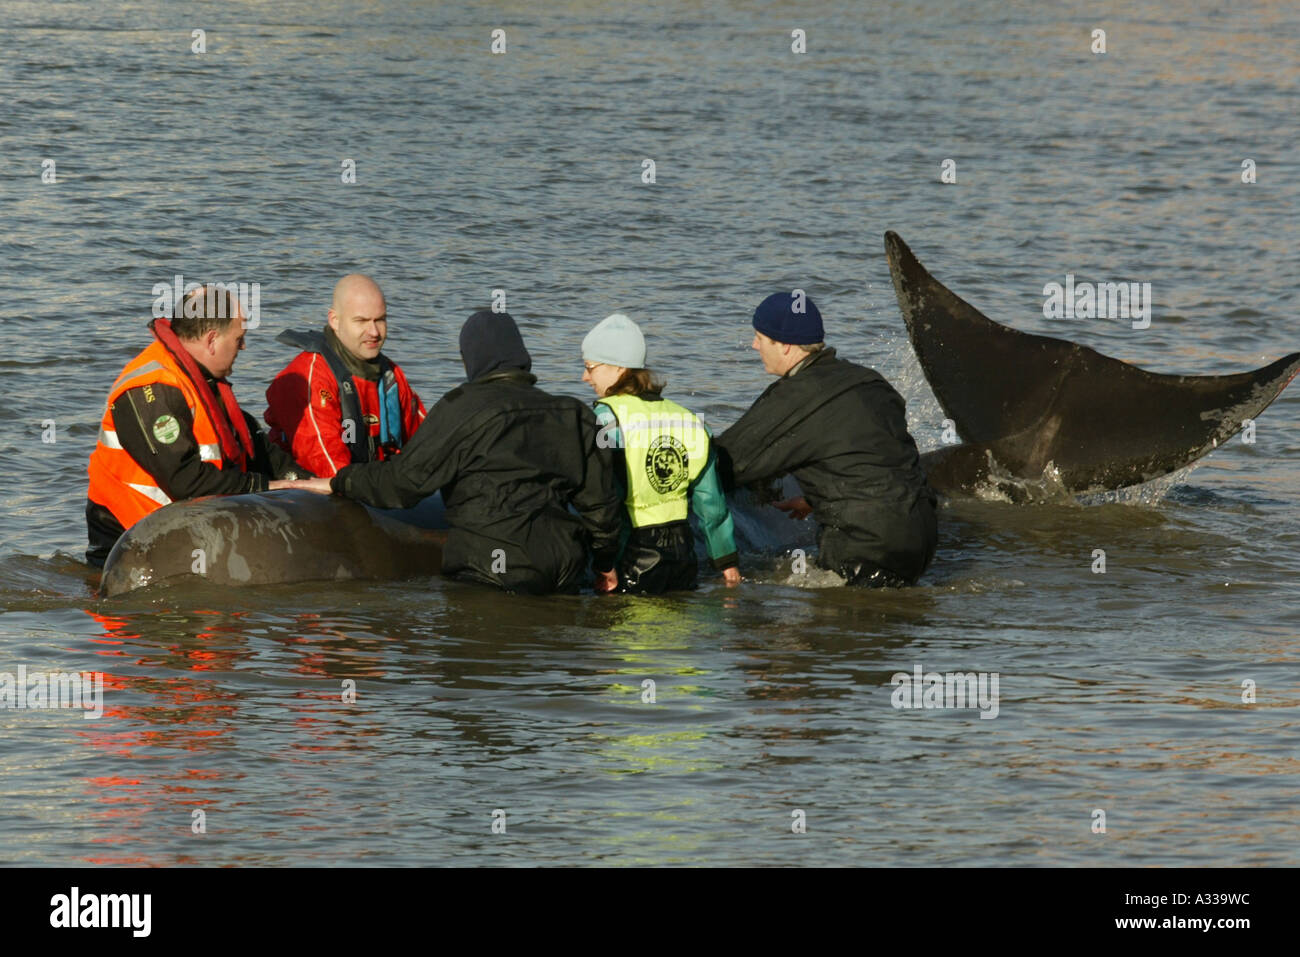 A Northern Bottlenosed whale is rescued in the river Thames, near Battersea, South London. Stock Photo